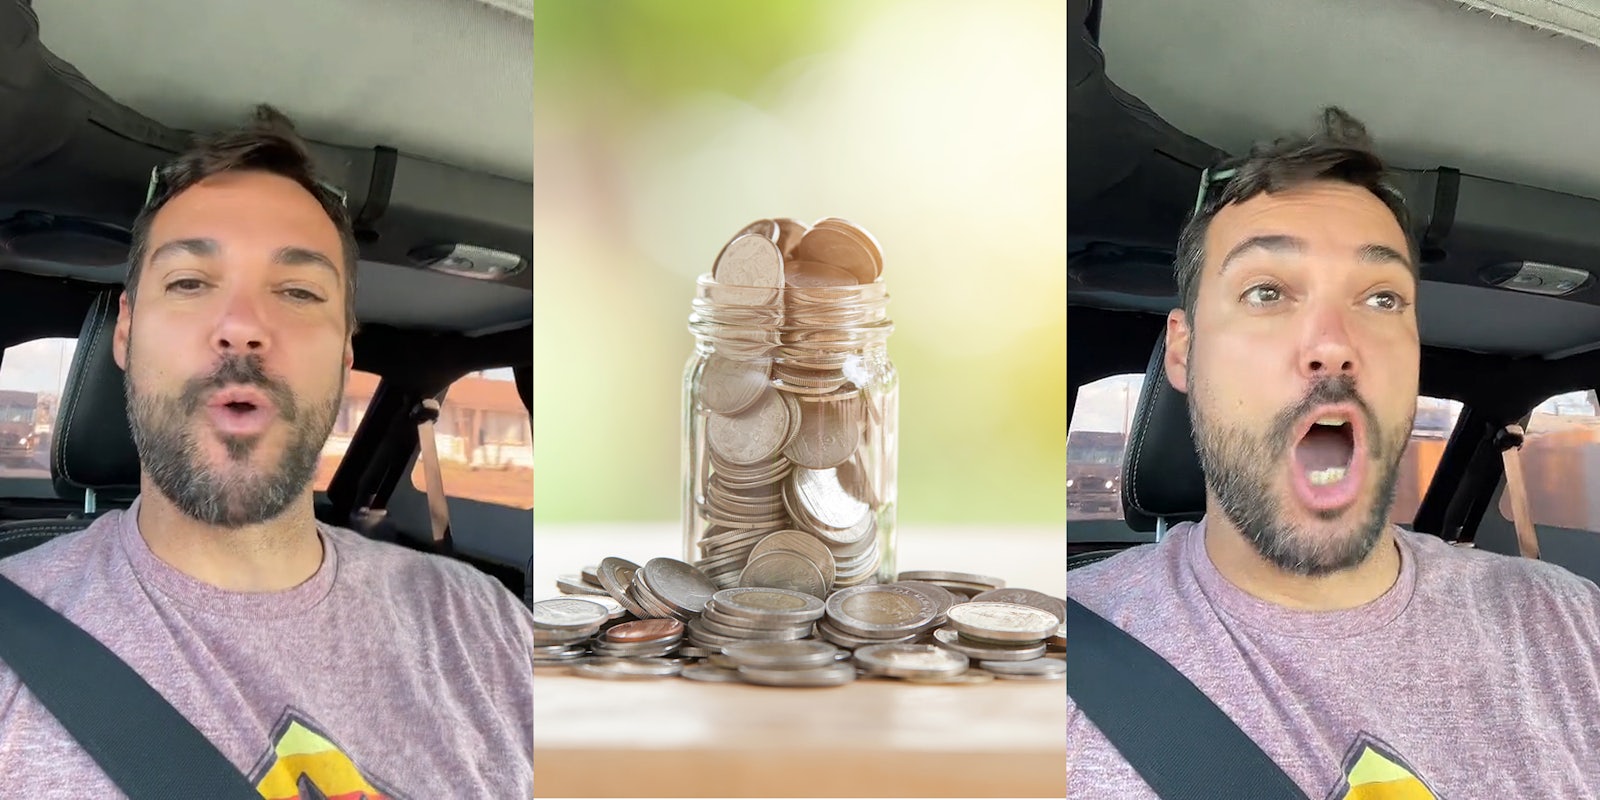 man speaking in car (l) coins inside of glass jar and on top of table (c) man speaking in car (r)